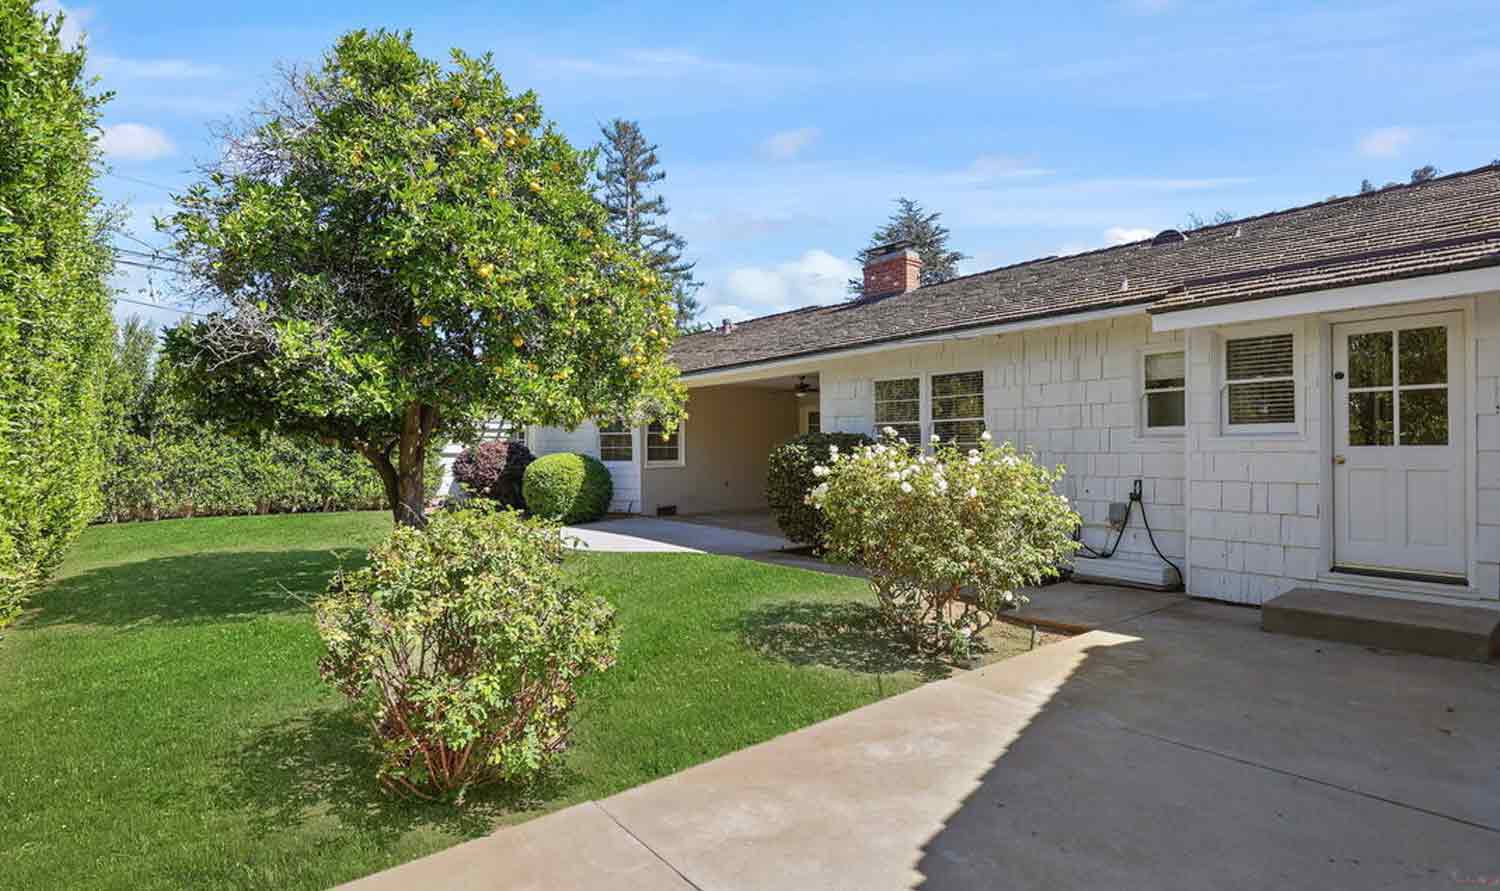 Adam Sandler's newly owned house outside (Pacific Palisades, LA, CA)